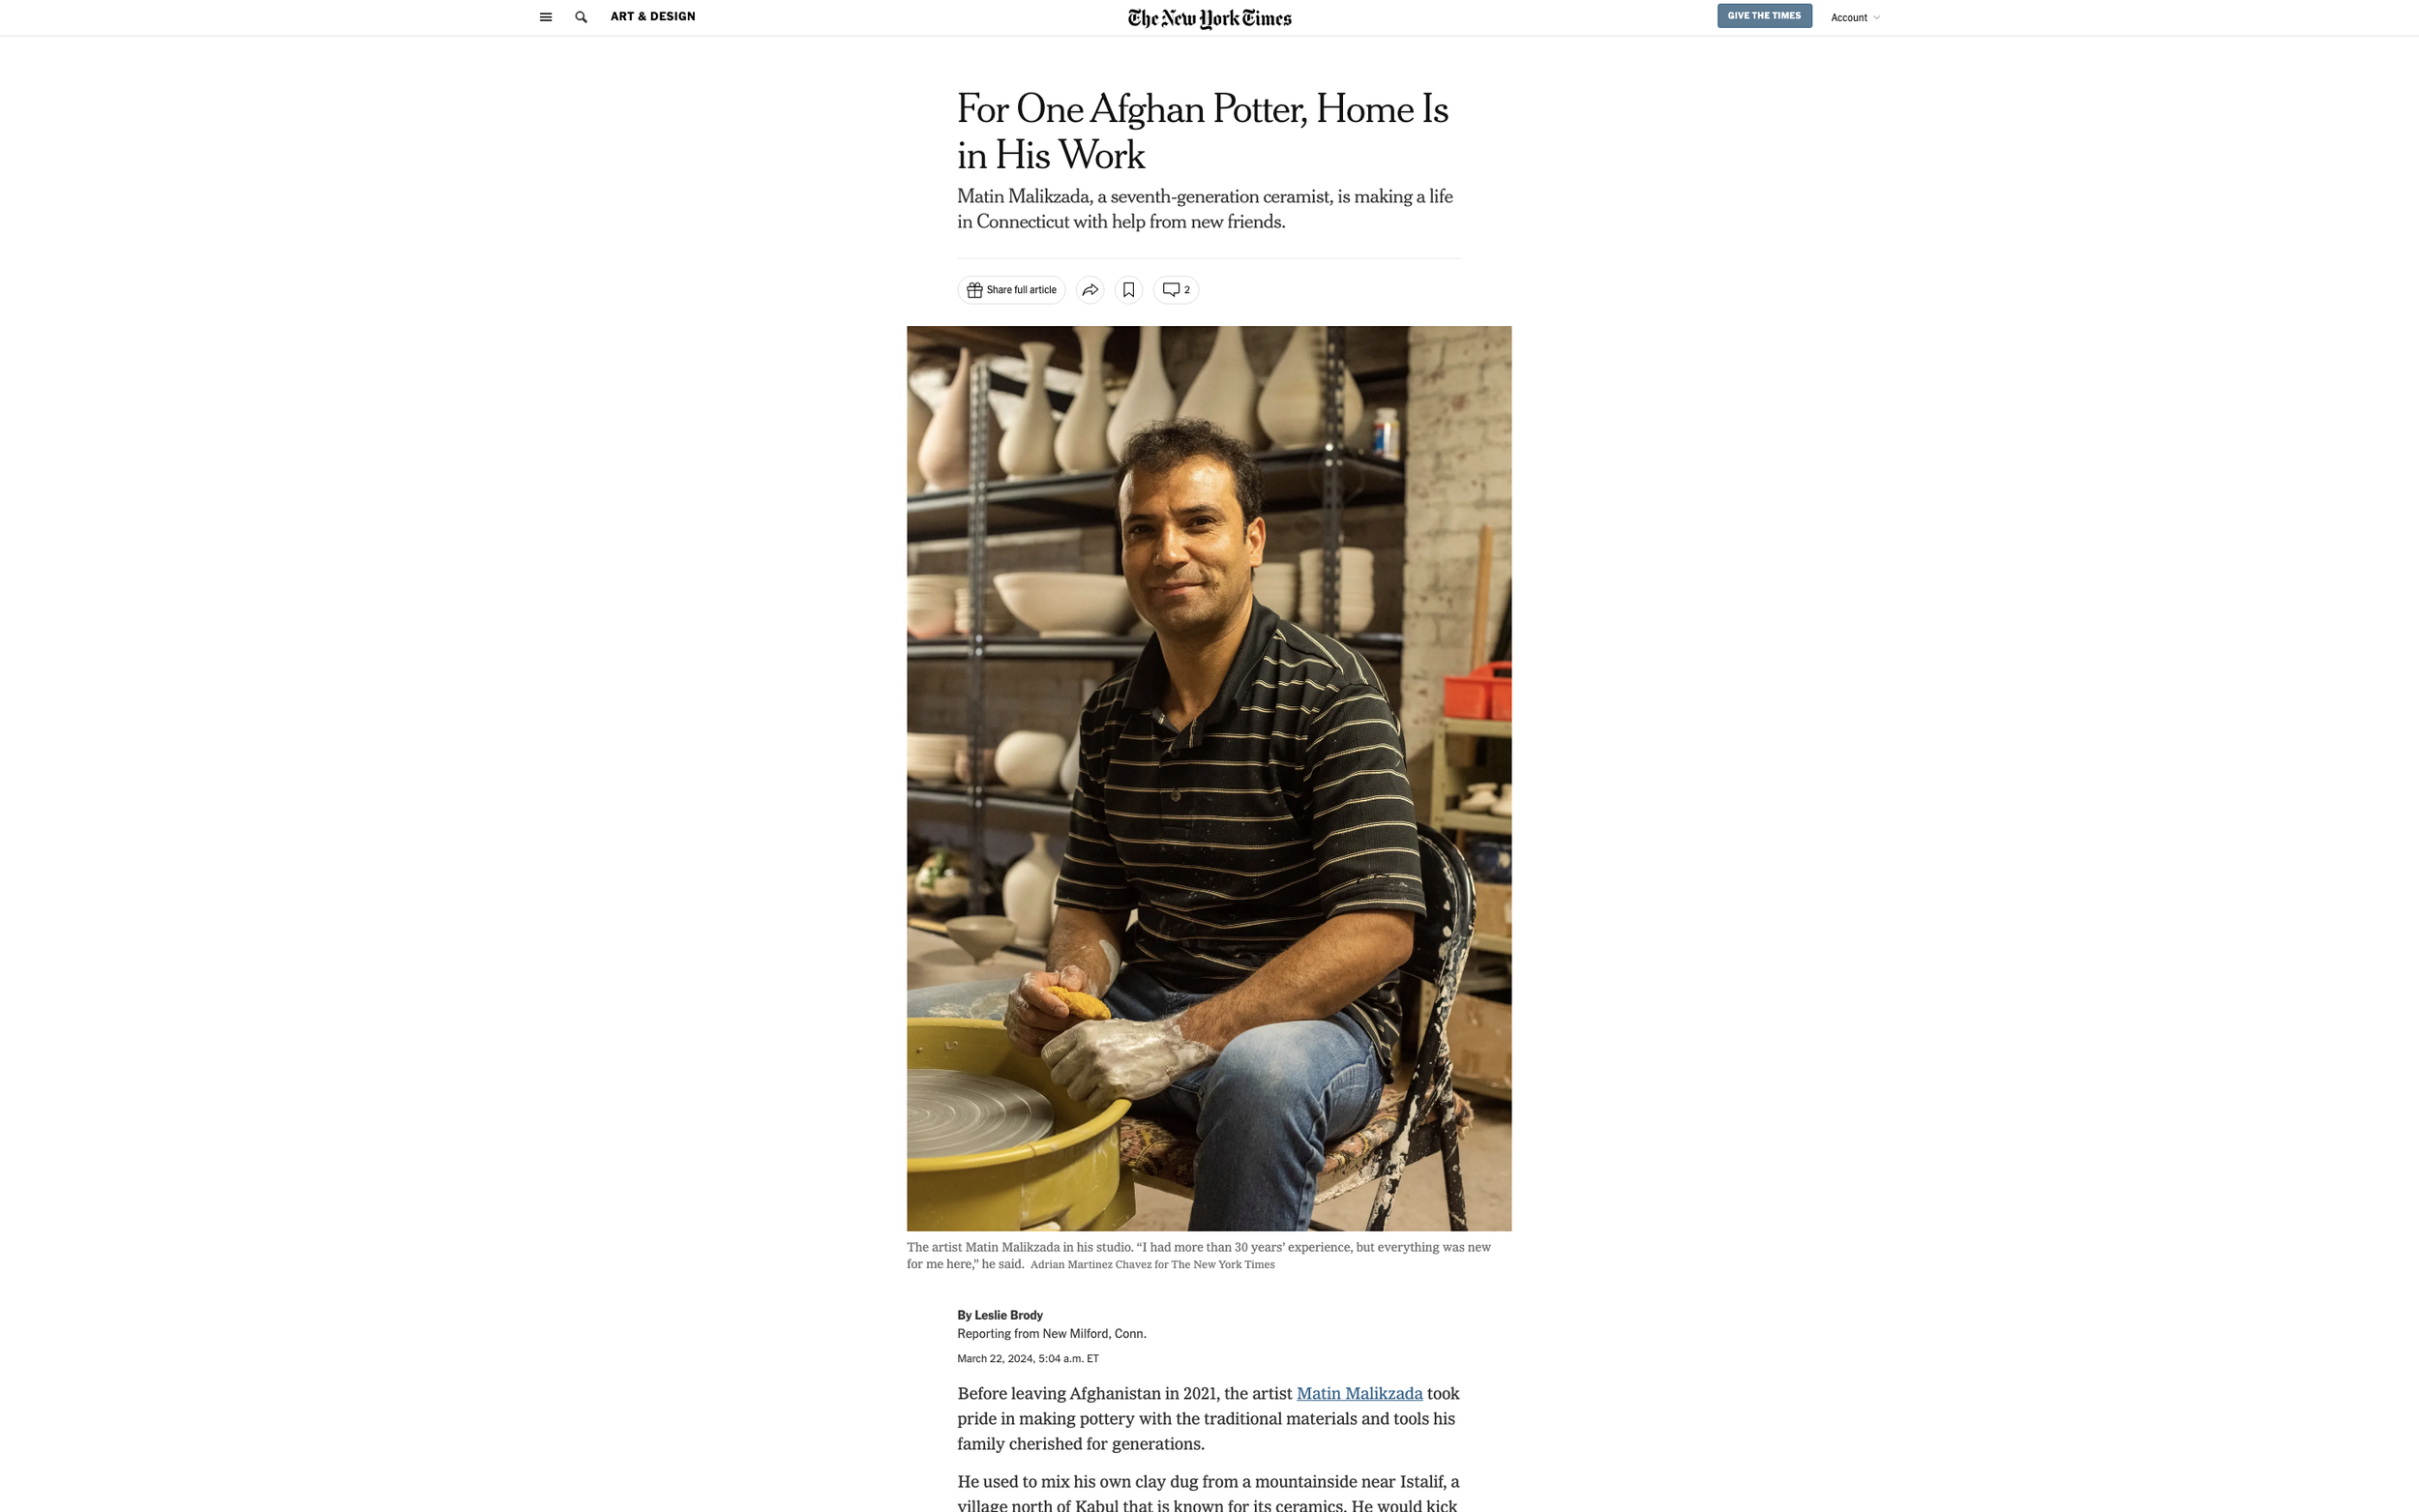  For One Afghan Potter, Home Is in His Work, The New York Times, March 2024 